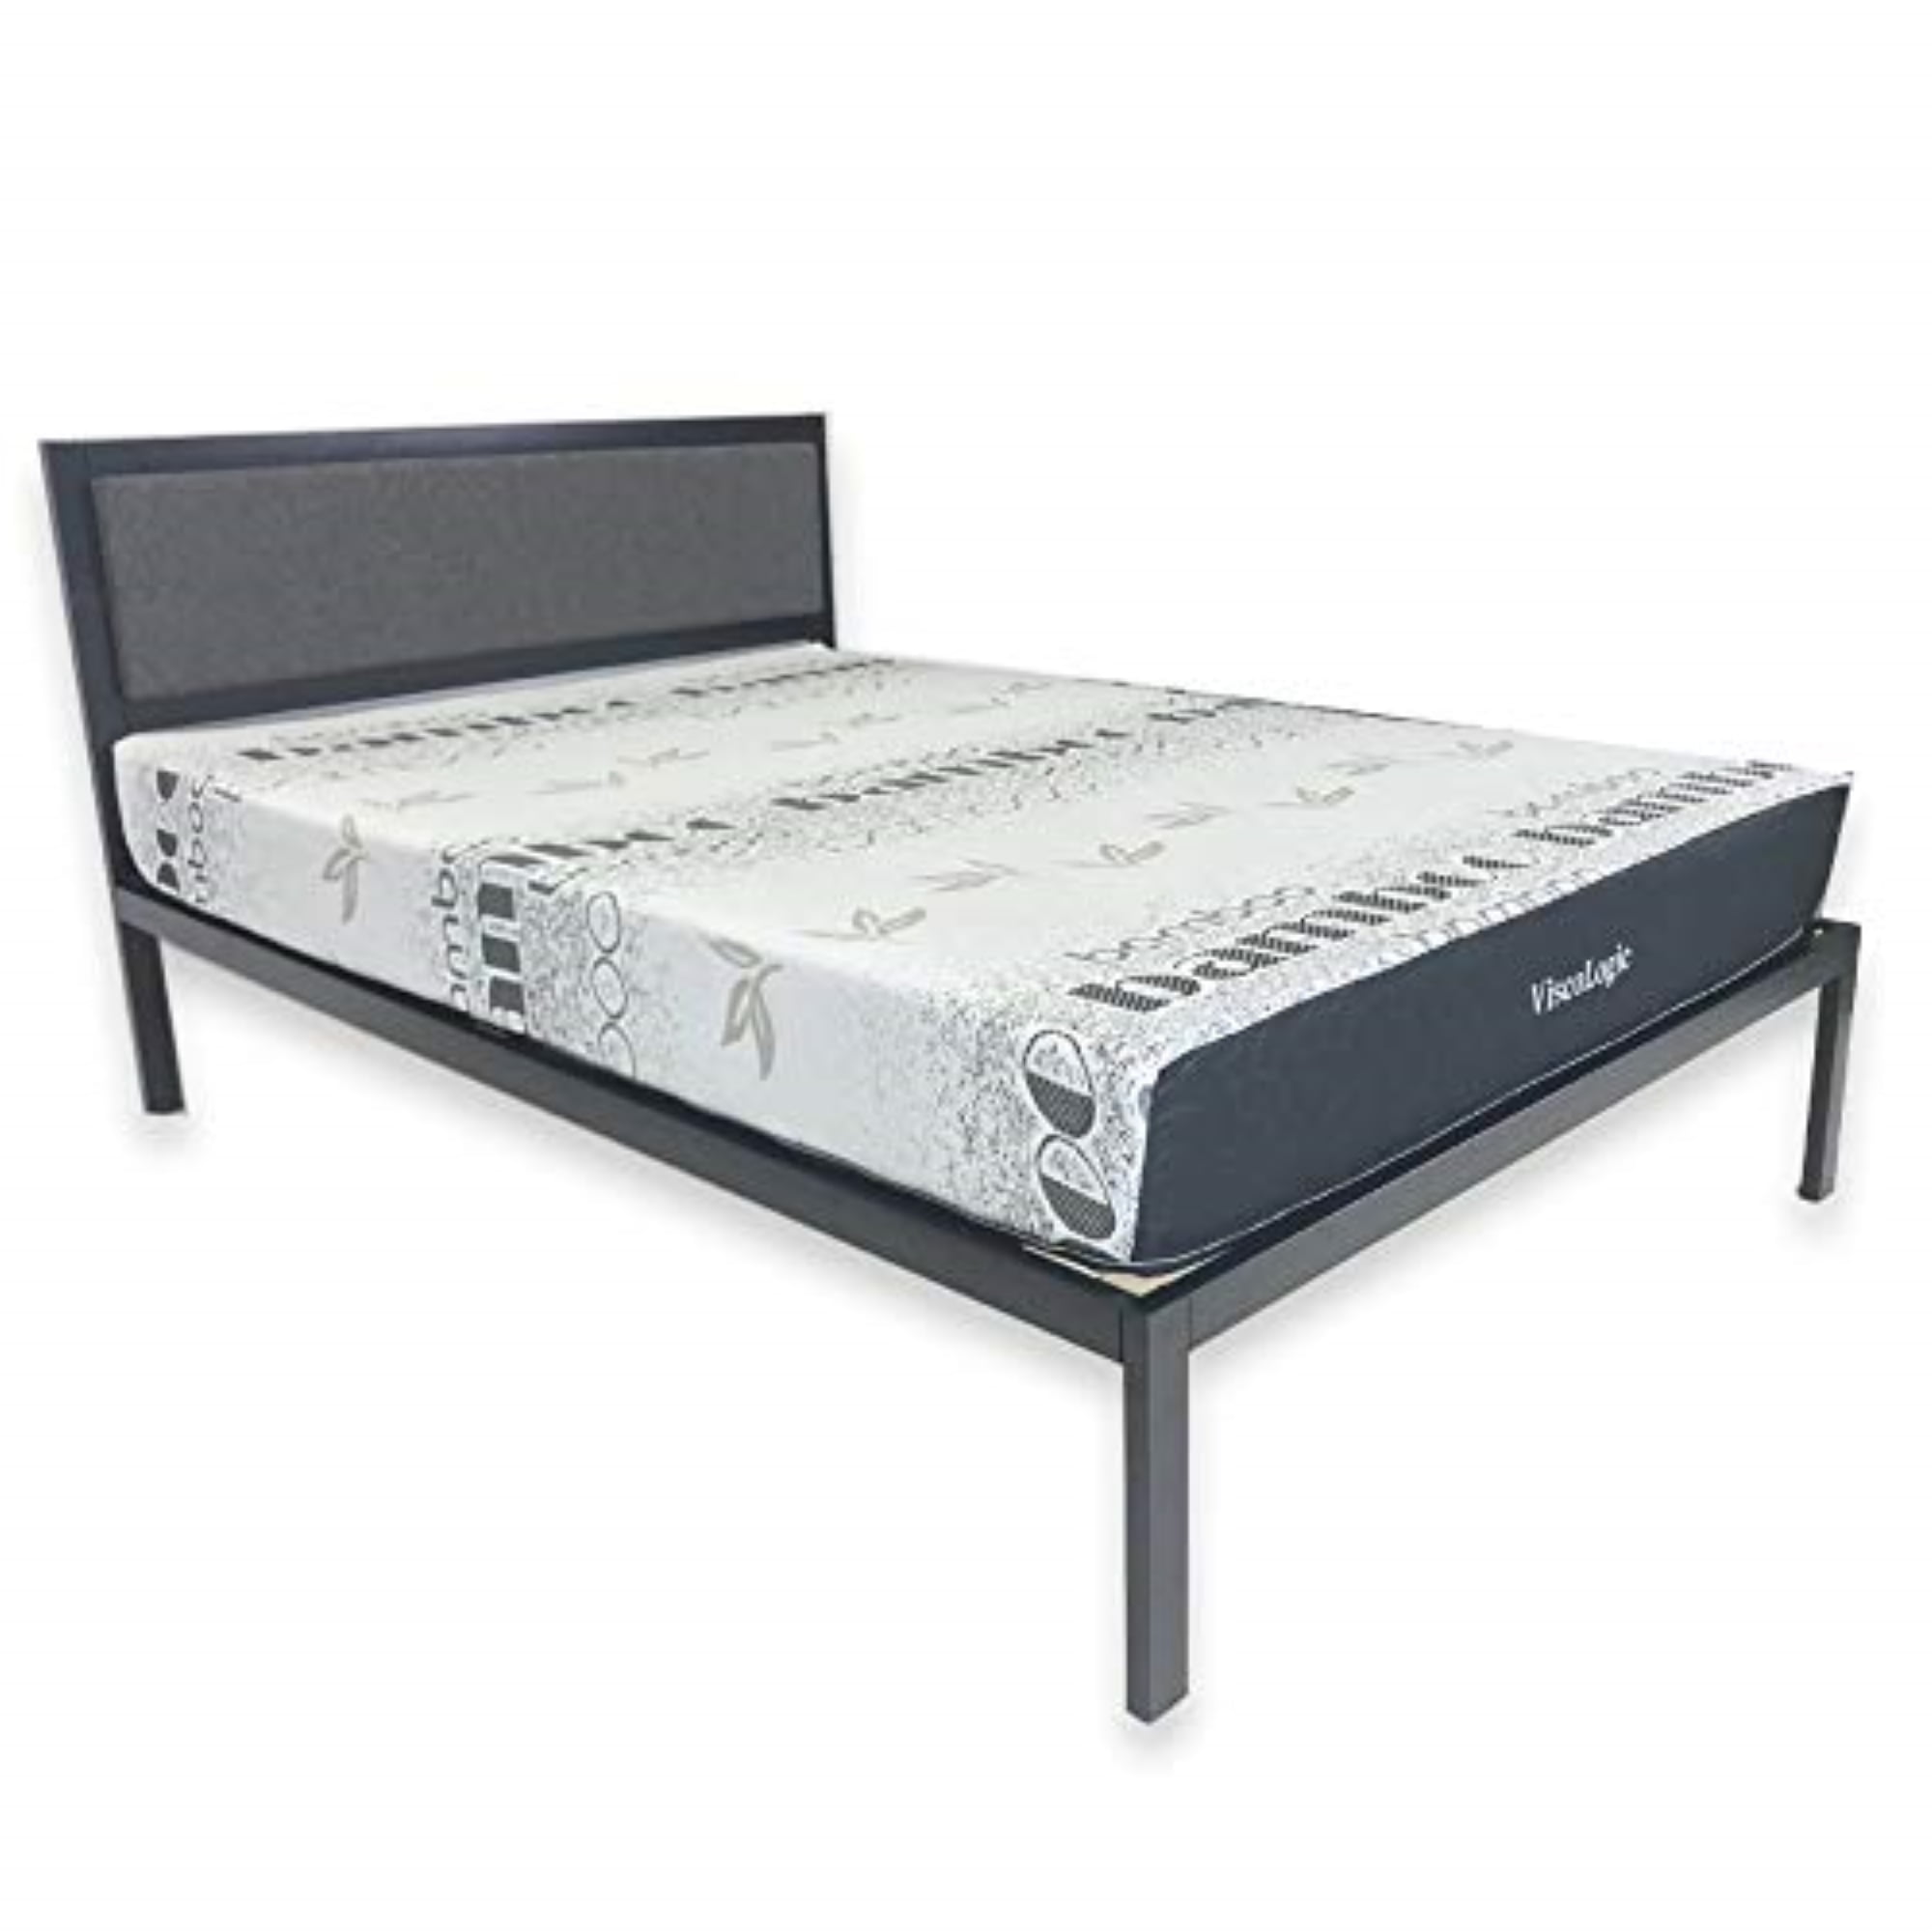 Luxurious Memory Foam Mattress Set, Bed And Bed Frame Combo